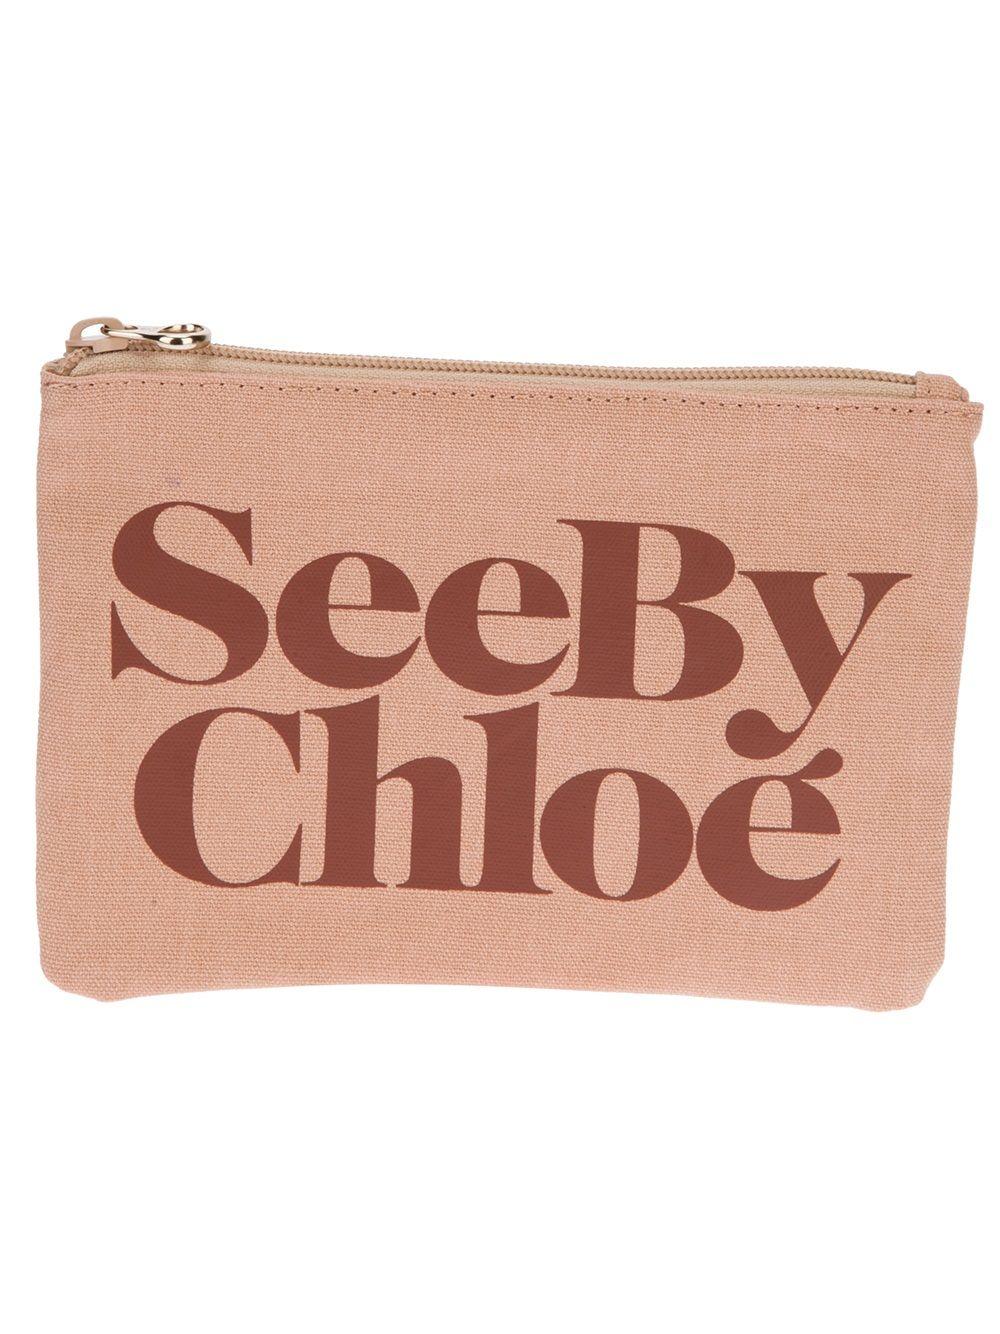 See by Chloe Logo - See By Chloé Logo Print Pouch in Natural